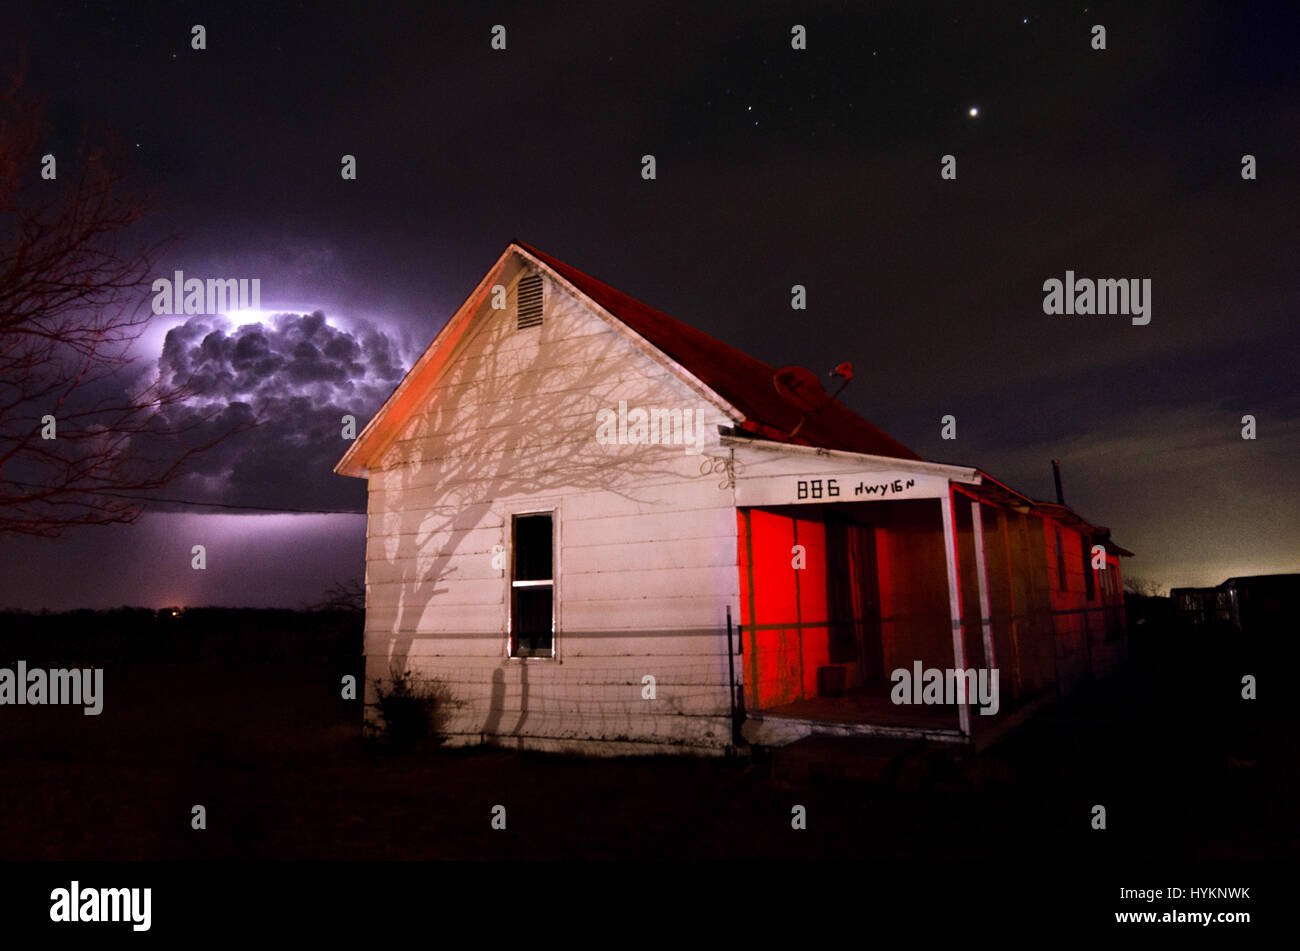 TORNADO ALLEY, USA: Storm shack, Throckmorton, Texas. THE DEADLIEST weather events have been captured on camera by one lightning quick photographer. Incredible photographs show extreme weather from America’s Tornado Alley, renowned for the frequency of its storms. From terrifying lightning bolts to all-encompassing tornados, these pictures manage to capture to ferocity and atmosphere of these natural phenomena. Stock Photo